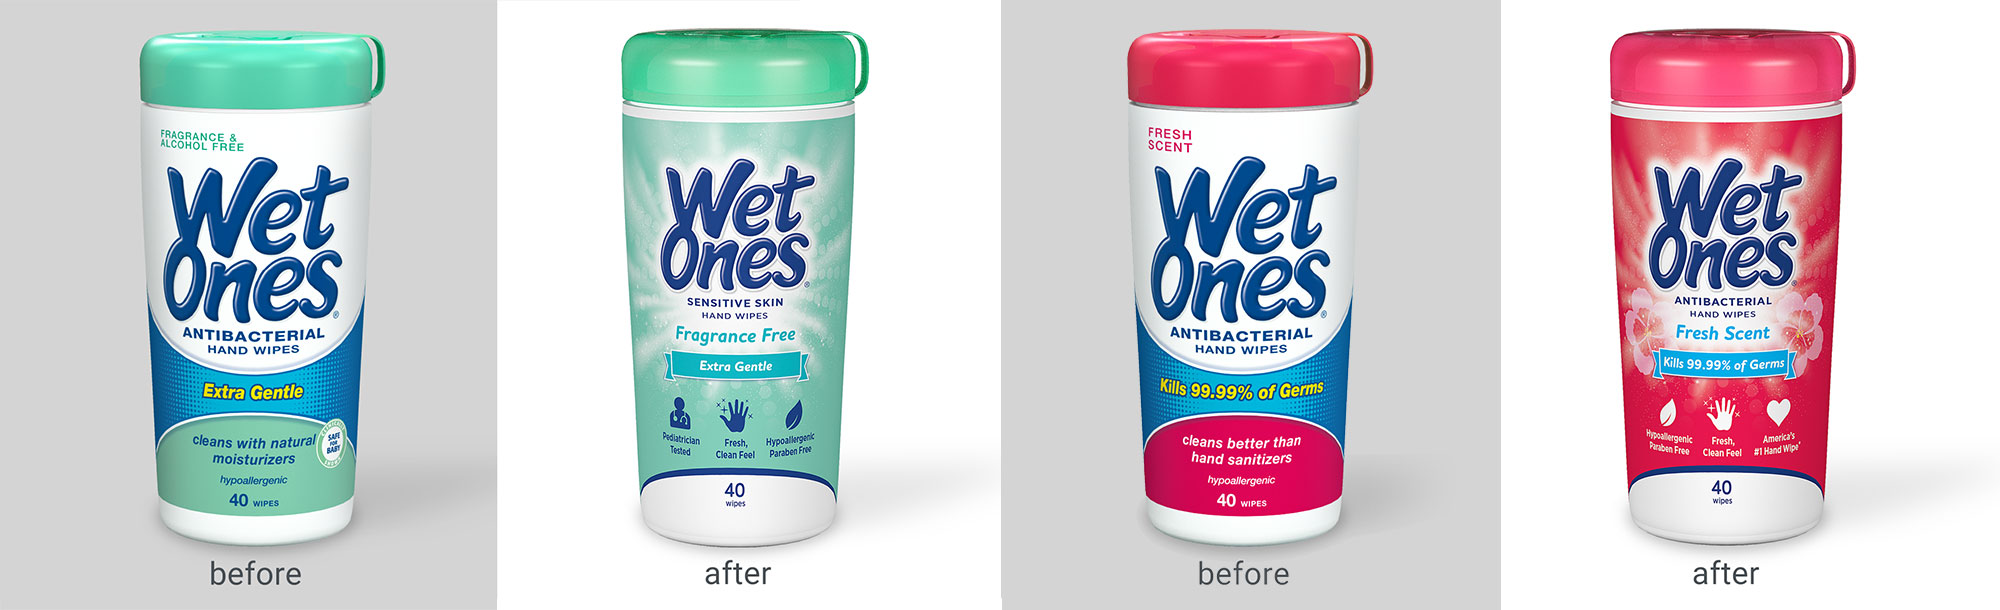 A before and after photo displays the evolution of the Wet Ones brand as a result of rebranding completed by domo domo. The before images include less colorful packaging with more gradient images, while the after images are more colorful and easy to differentiate one product from the next.